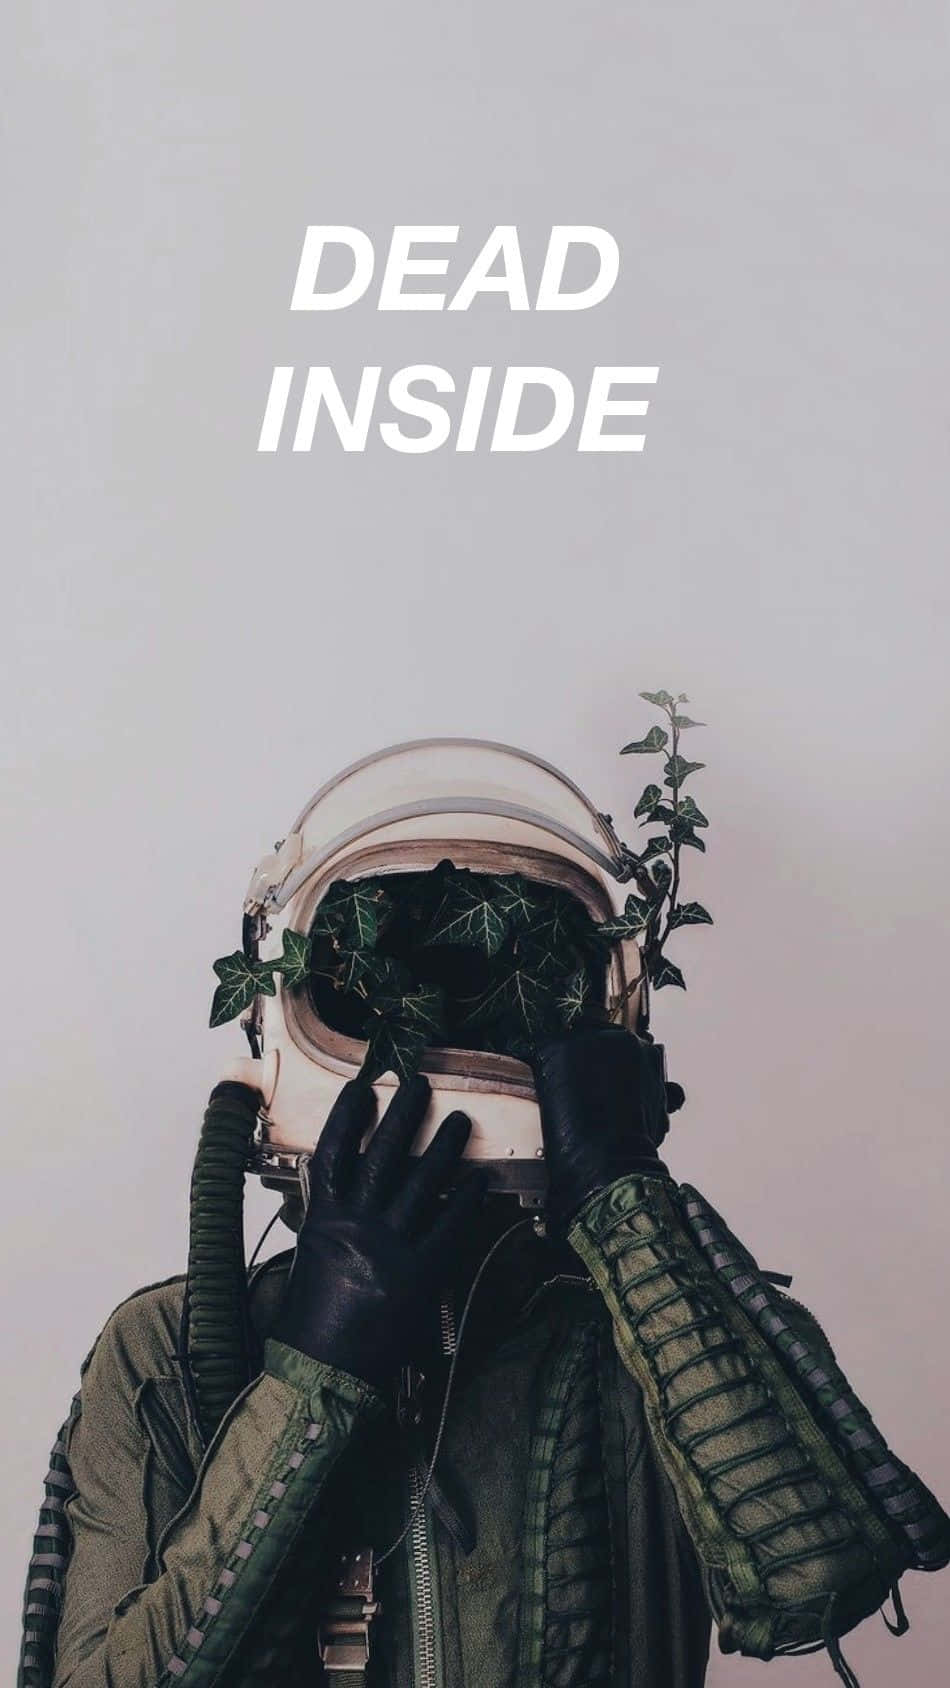 Stay Alive On The Outside, But Dead Inside Wallpaper